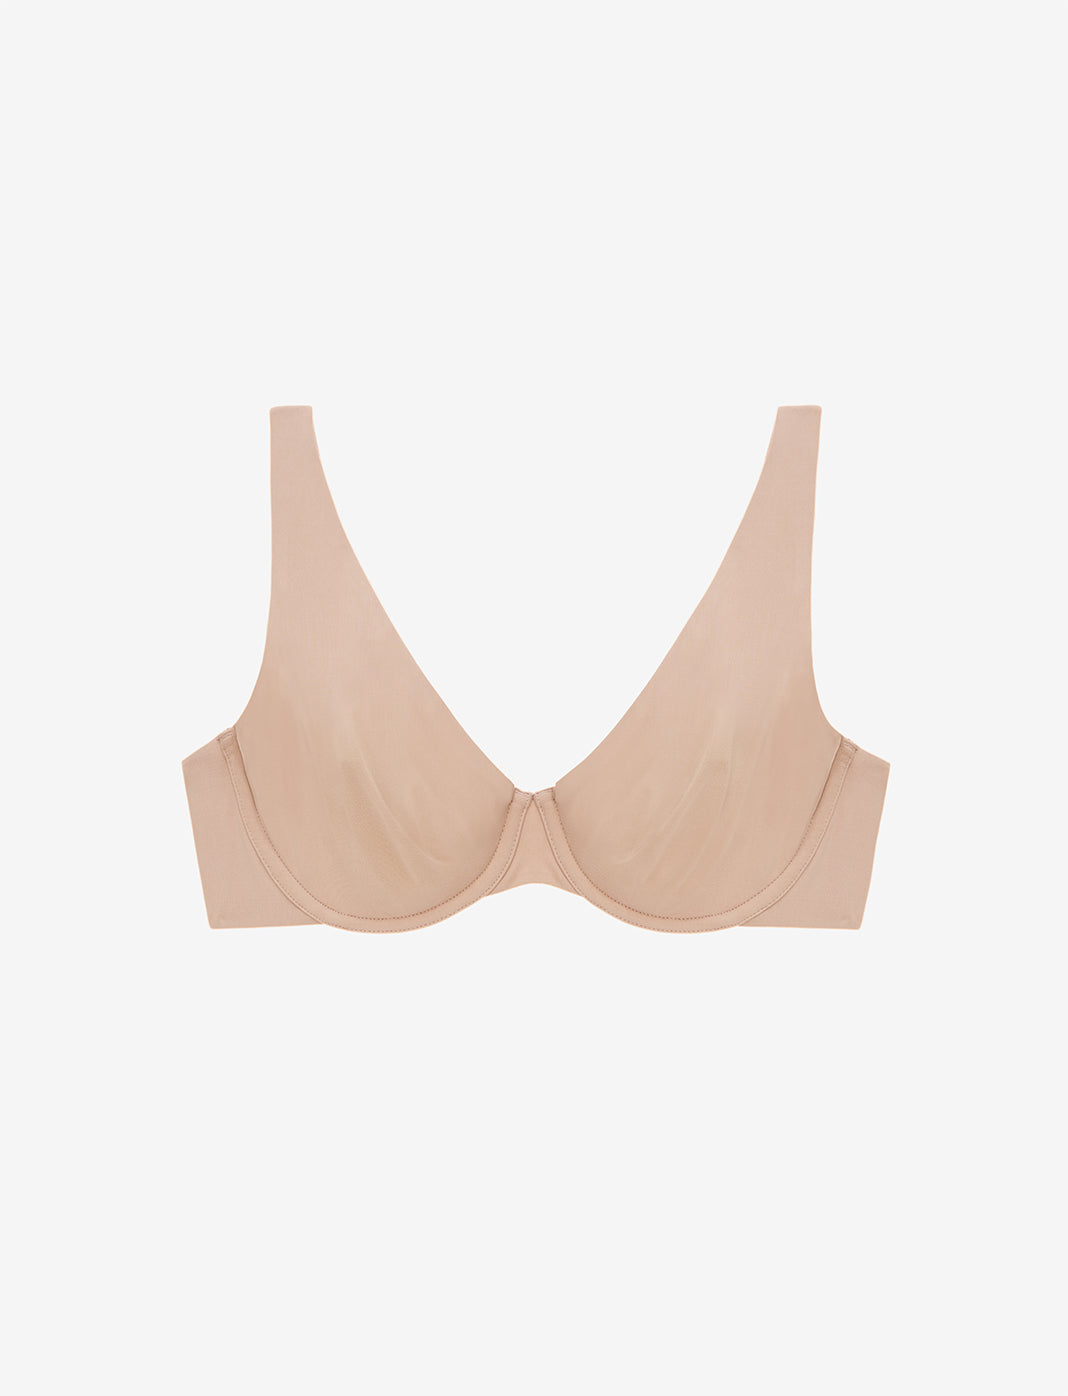 Our #1 bra is only $49 - Third Love